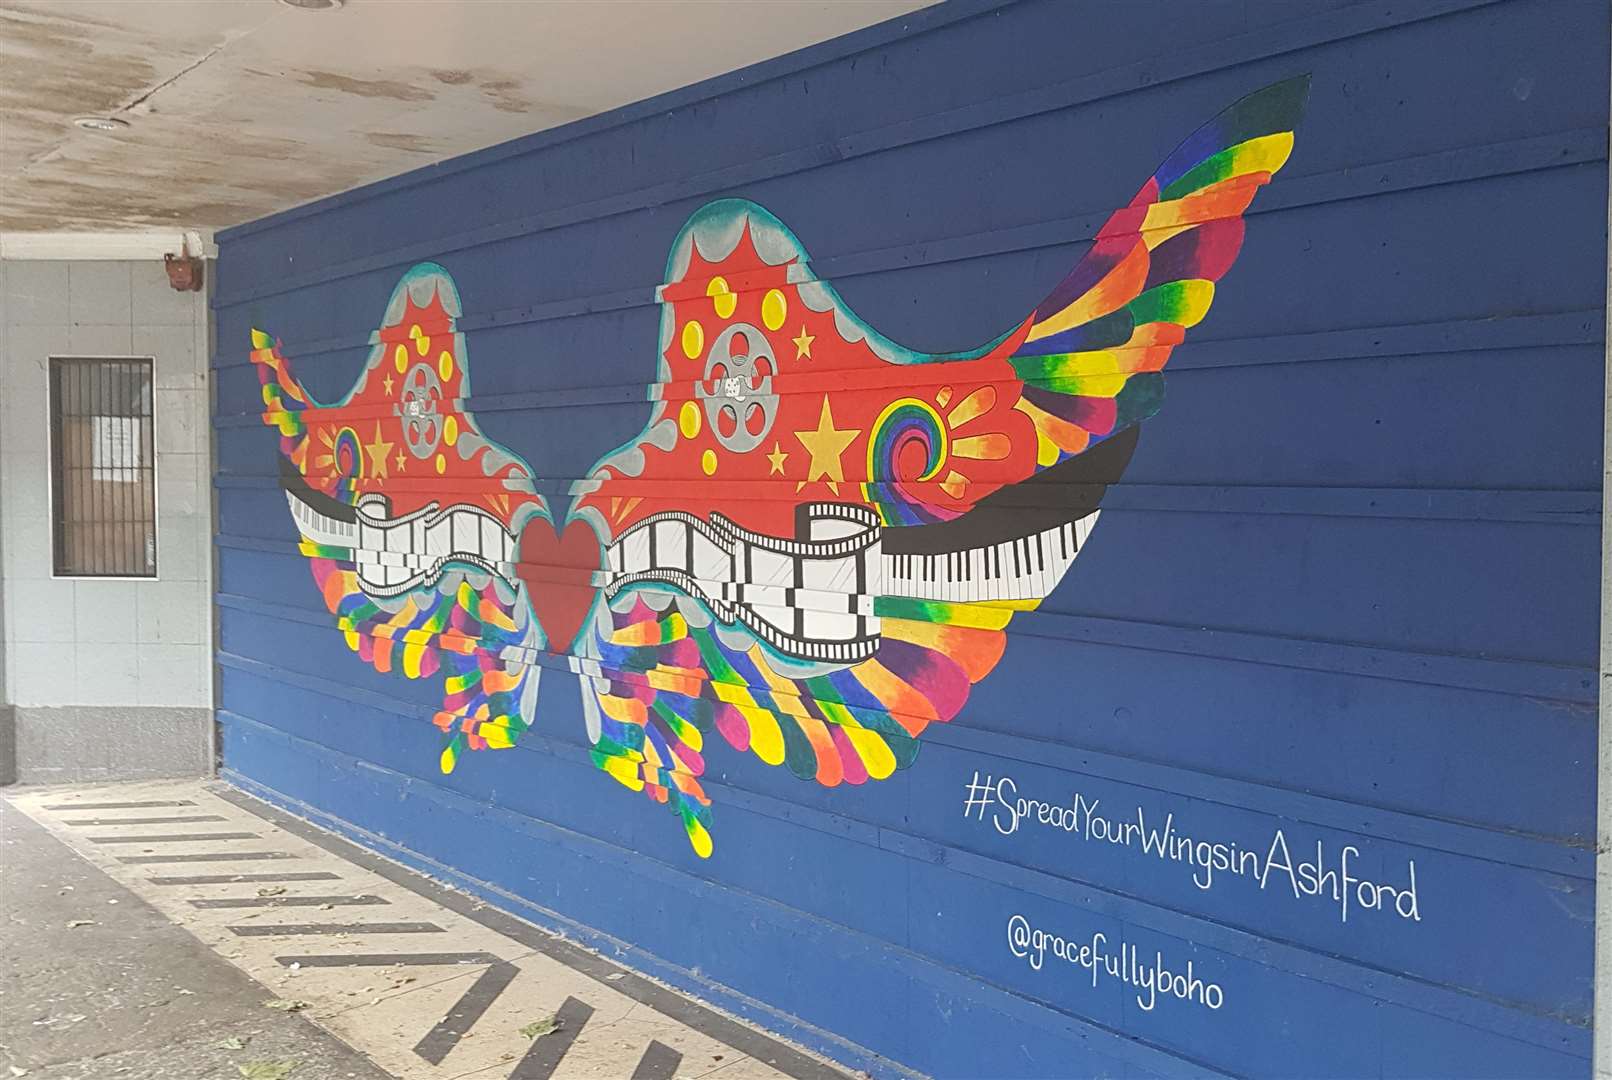 The 'spread your wings in Ashford' mural was completed last year on the former Mecca Bingo building